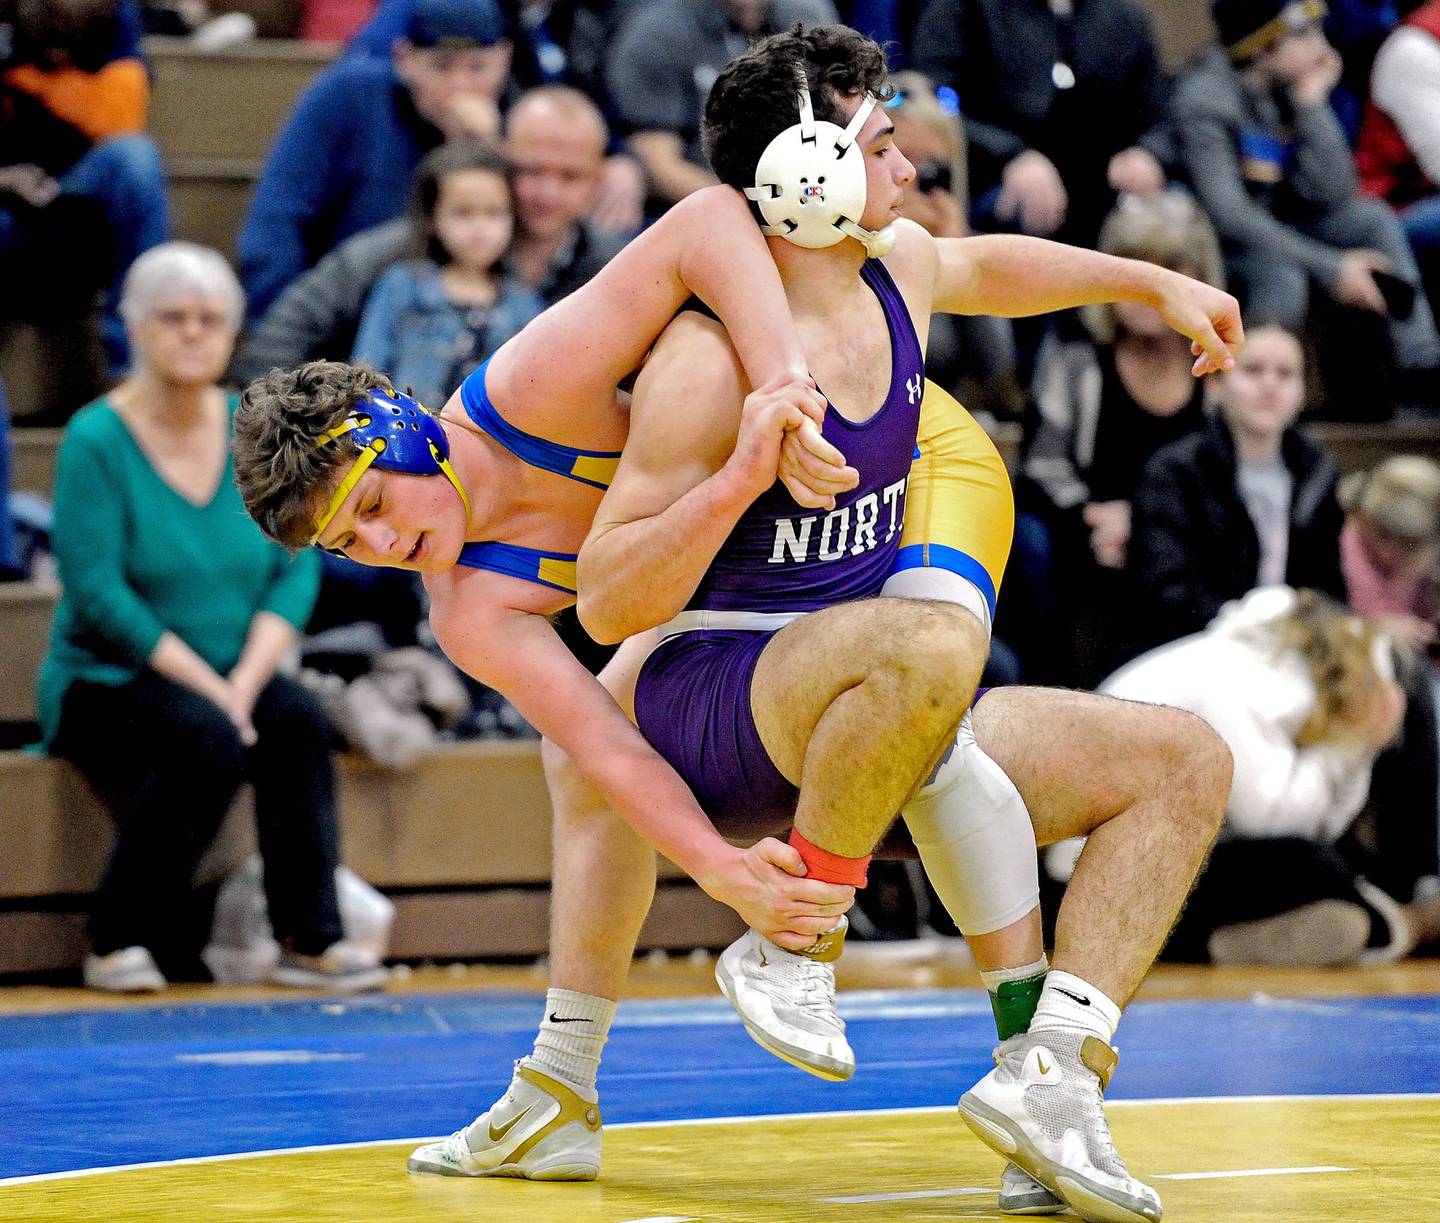 Lyons’ Griffin King, left, wrestles against Downers Grove North’s Ben Bielawski in the championship match at 182 pounds during the Class 3A Lyons Regional in La Grange on Saturday, Feb. 8, 2020.